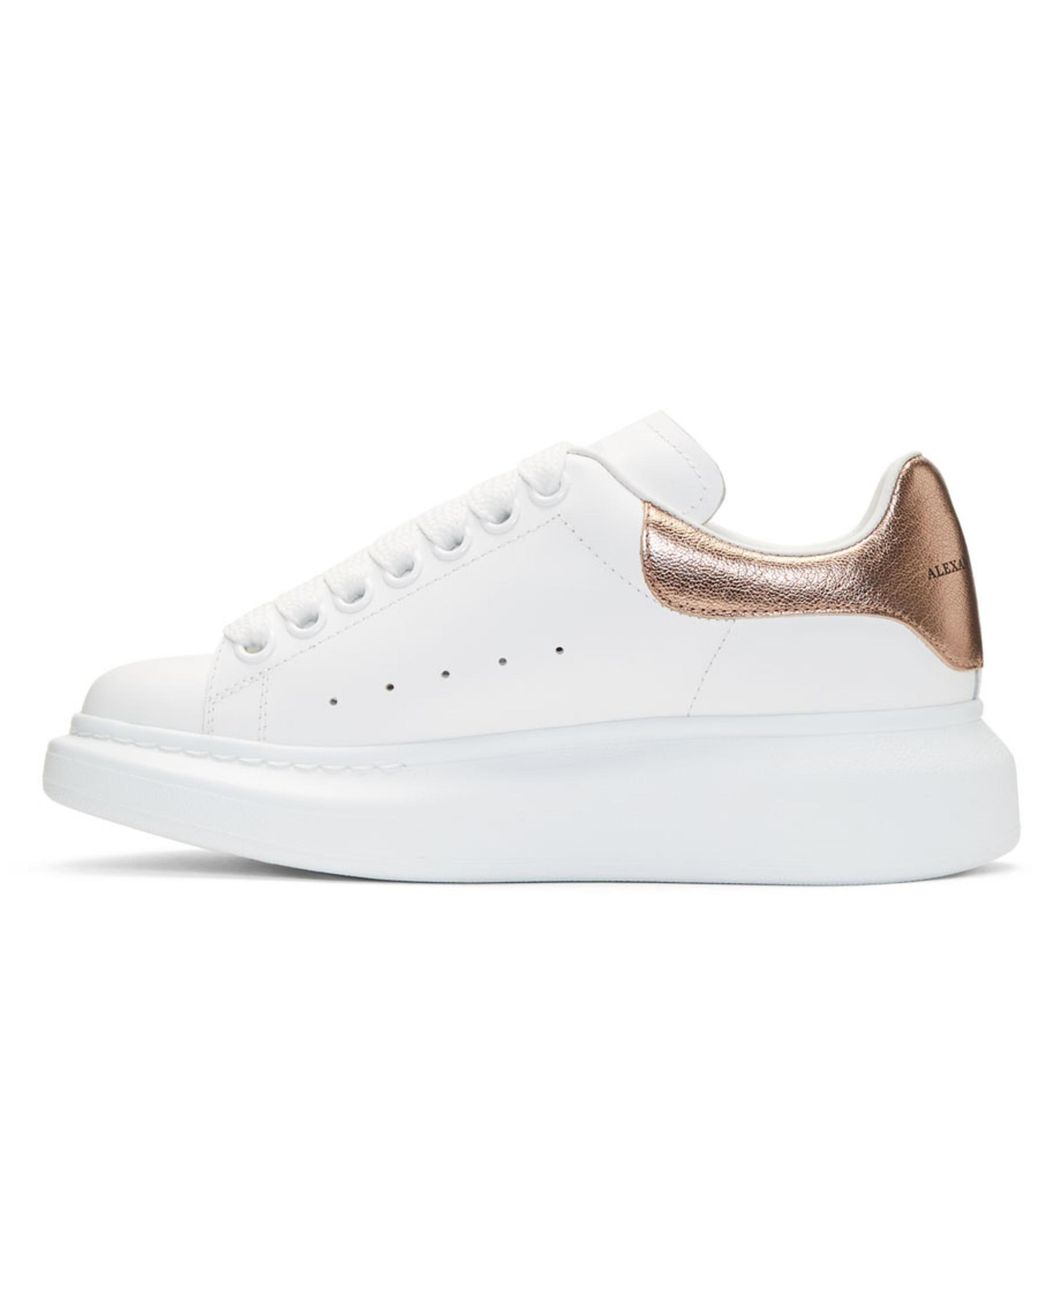 Alexander Mcqueen White leather sneakers with gold leather h  www.omniblonde.com